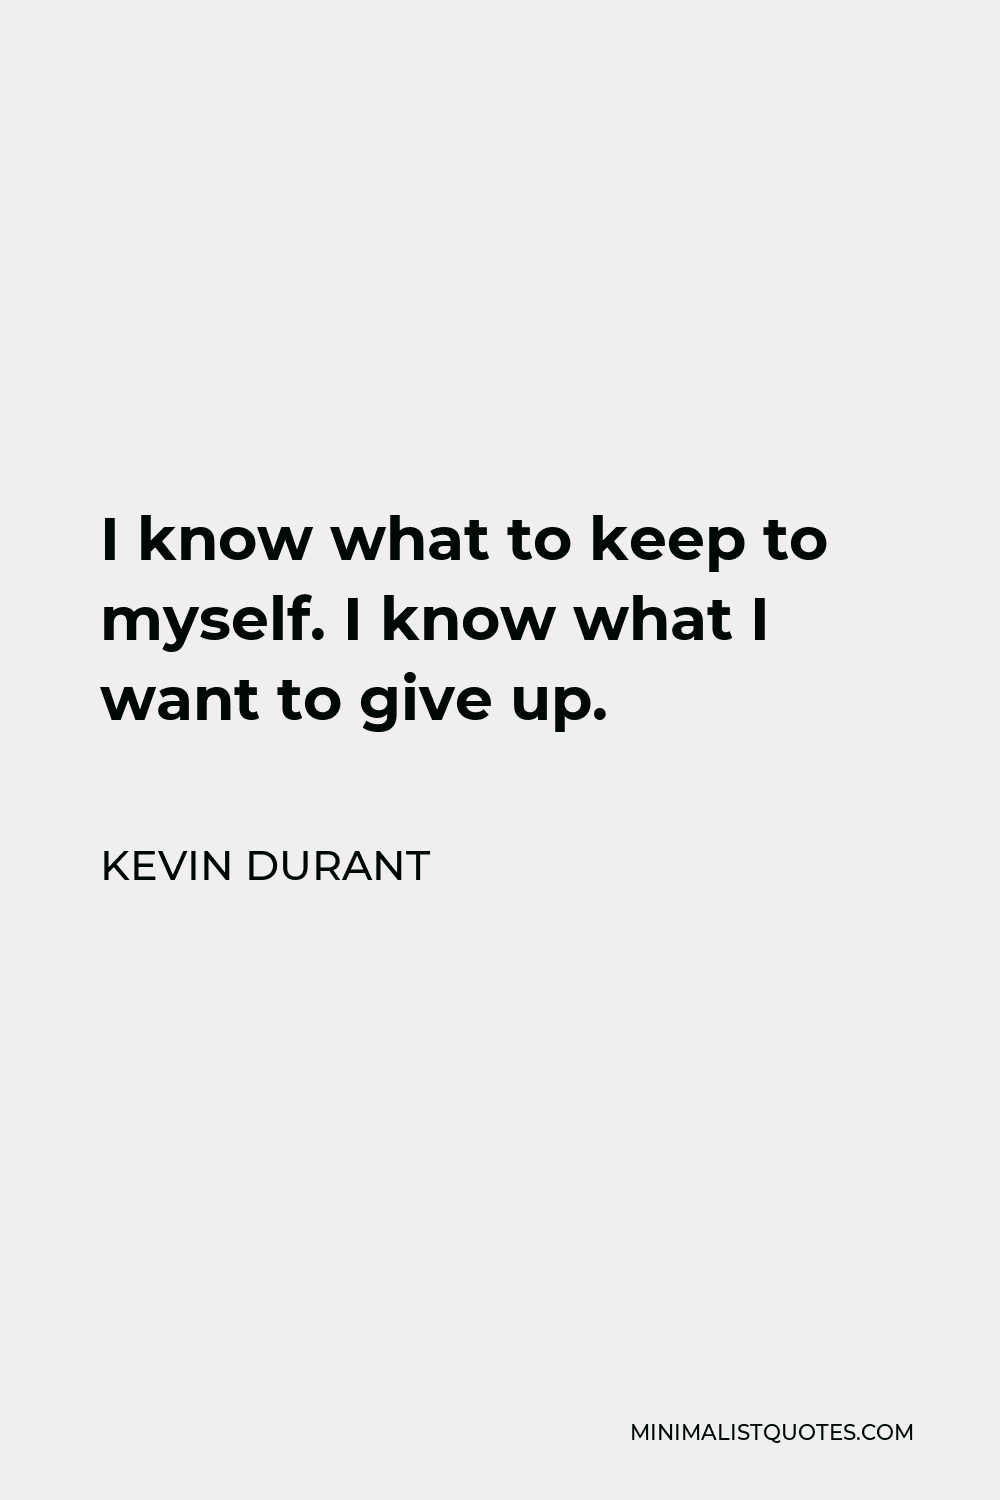 Kevin Durant Quote - I know what to keep to myself. I know what I want to give up.